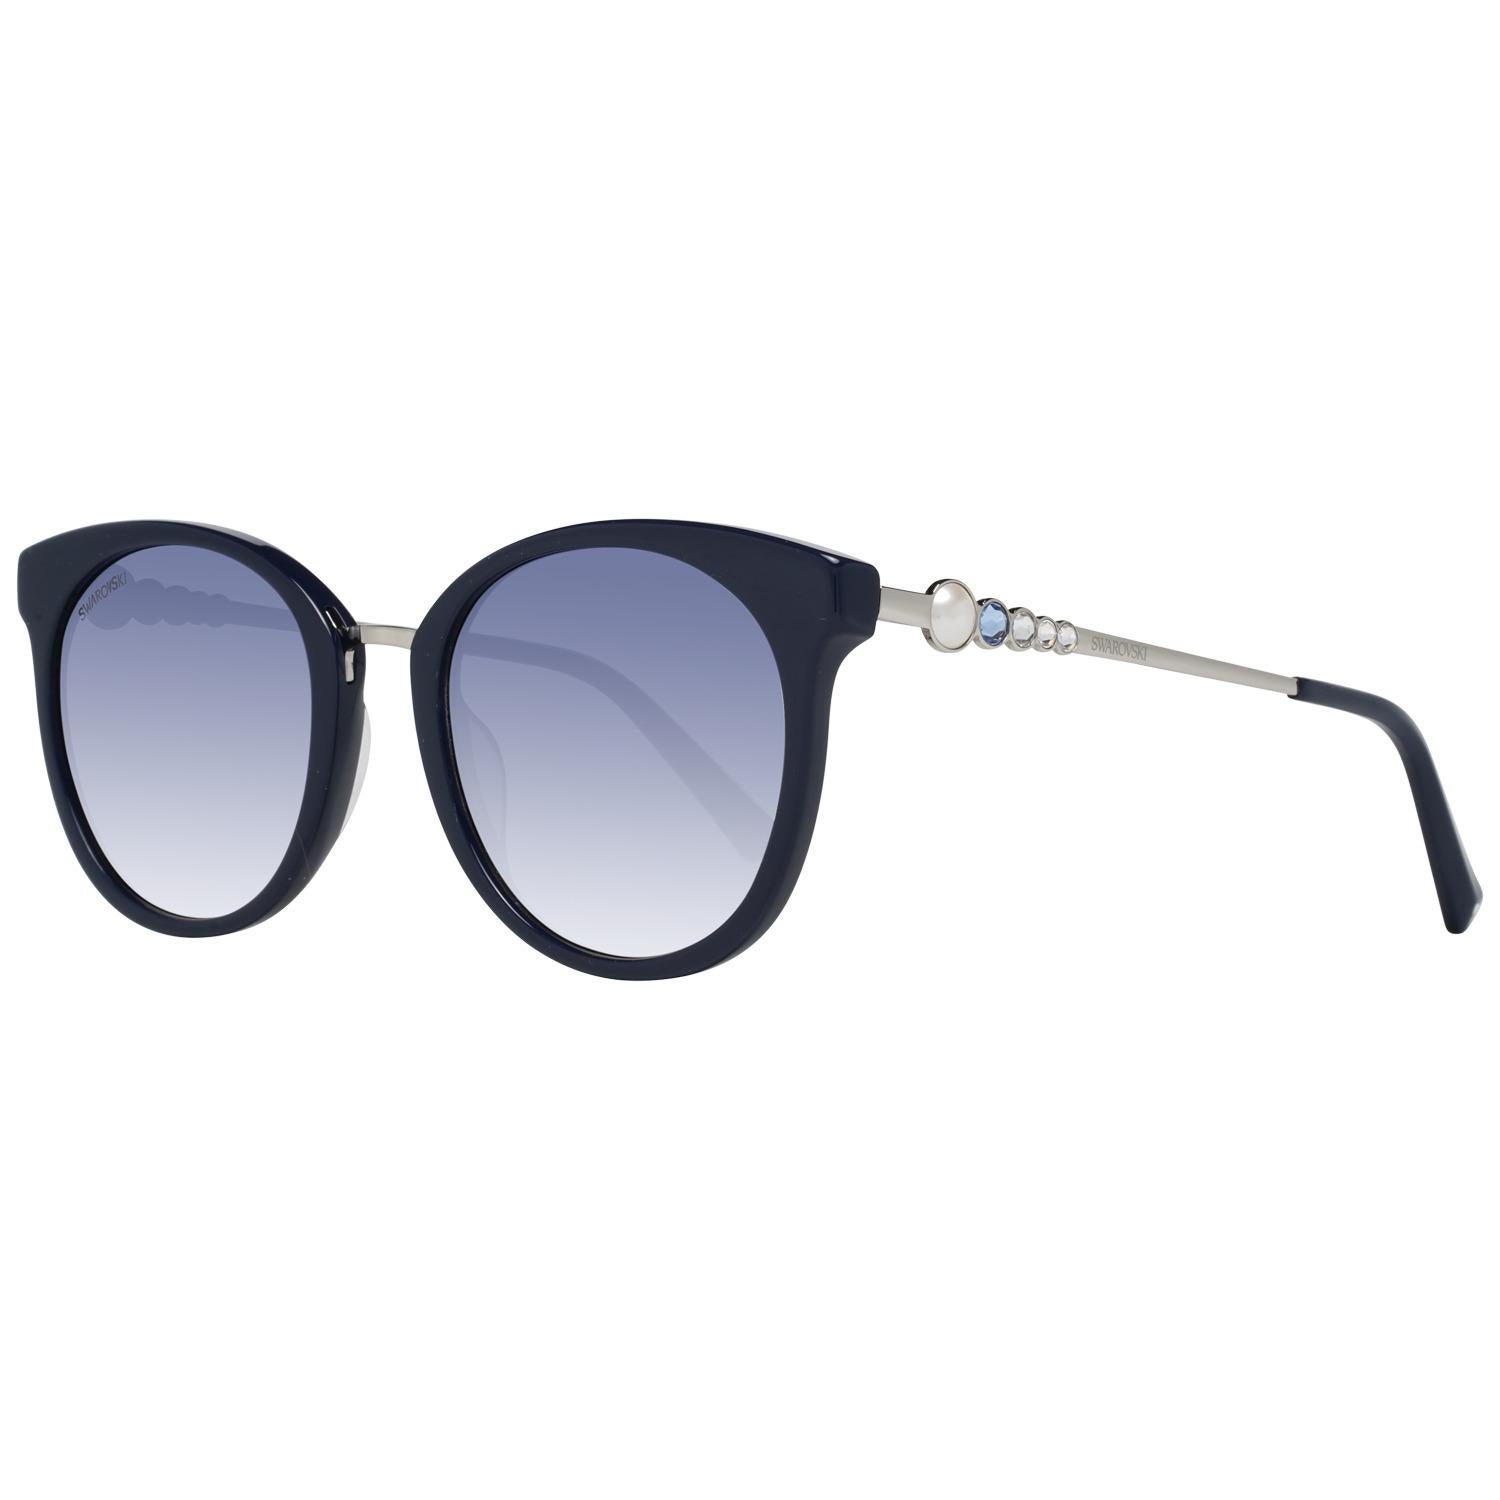 DetailsMATERIAL: AcetateCOLOR: BlueMODEL: SK0217 5290WGENDER: WomenCOUNTRY OF MANUFACTURE: ChinaTYPE: SunglassesORIGINAL CASE?: YesSTYLE: RoundOCCASION: CasualFEATURES: LightweightLENS COLOR: BlueLENS TECHNOLOGY: GradientYEAR MANUFACTURED: